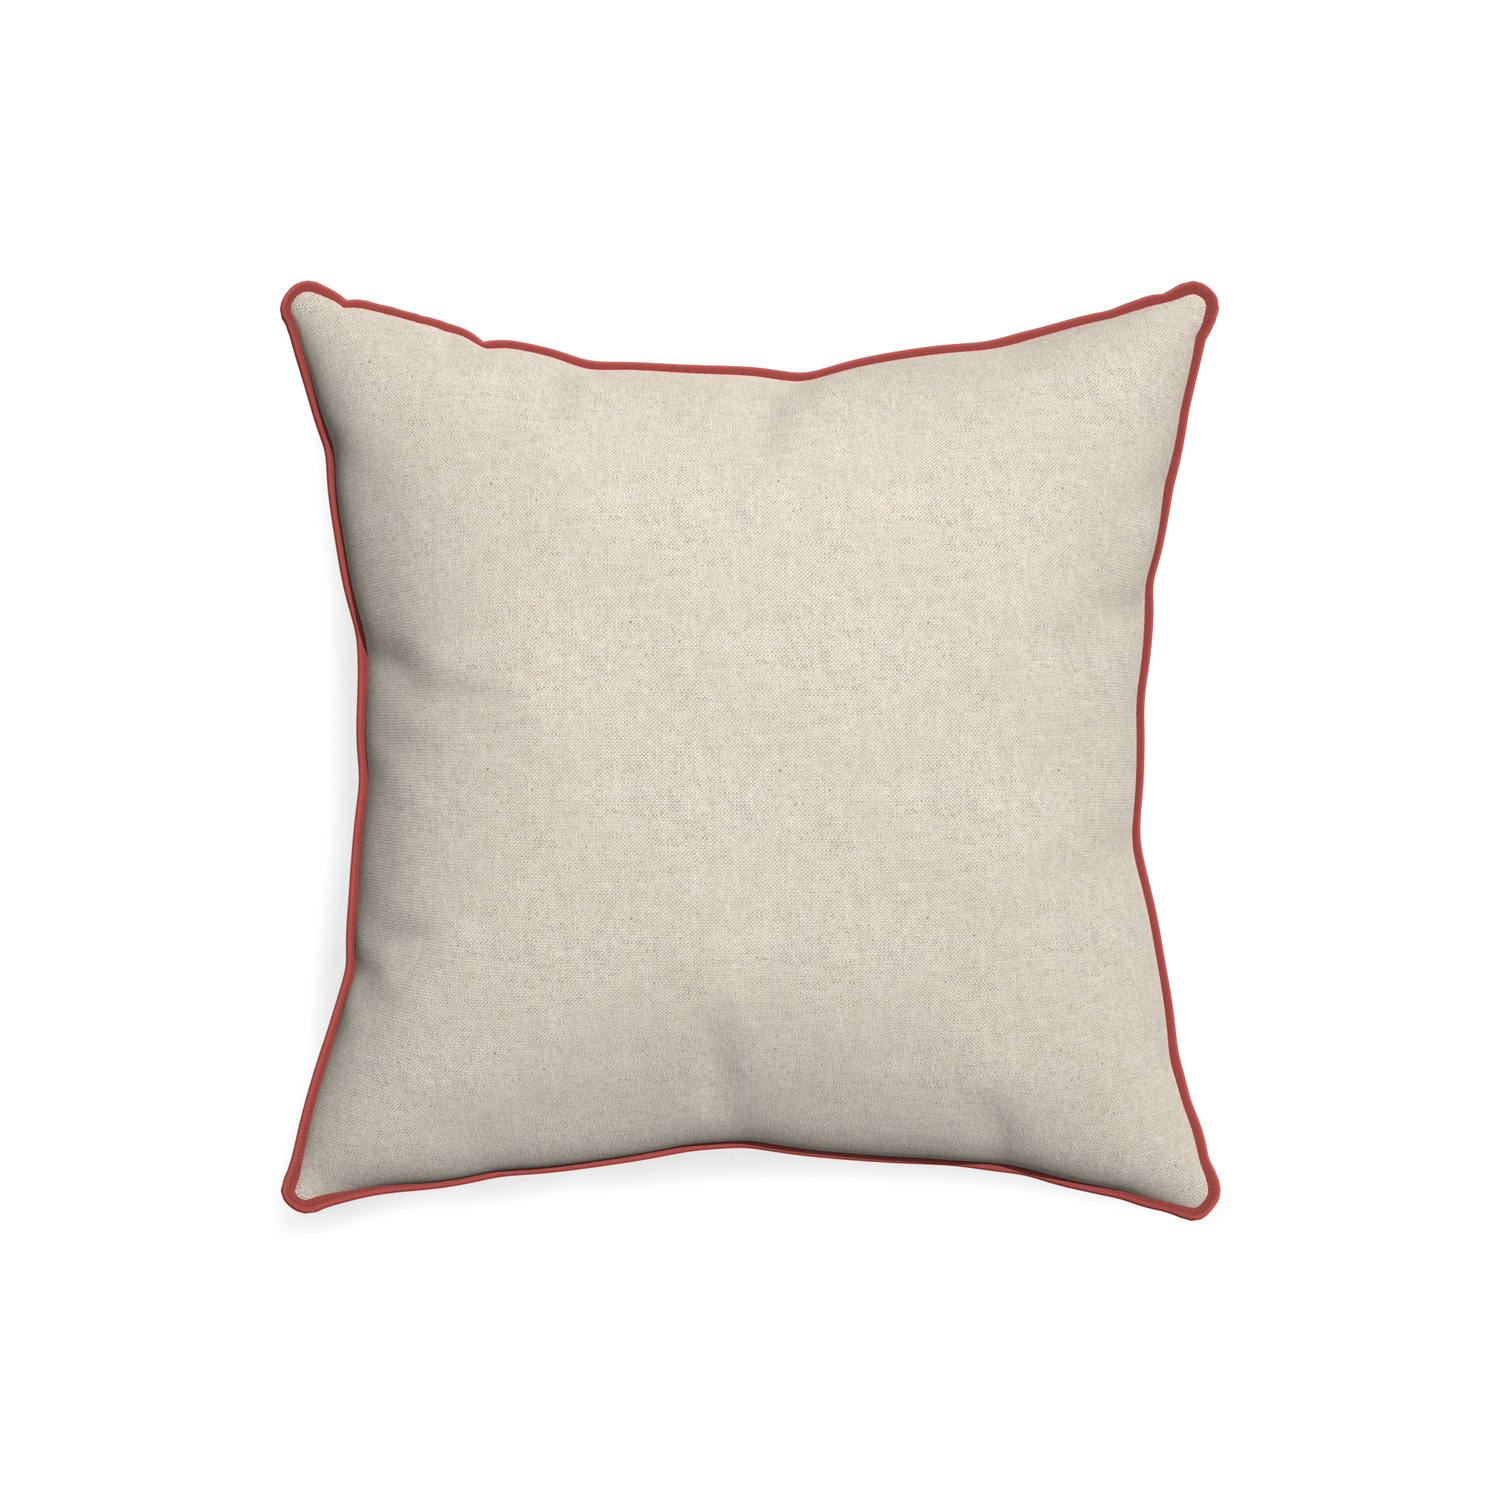 20-square oat custom pillow with c piping on white background